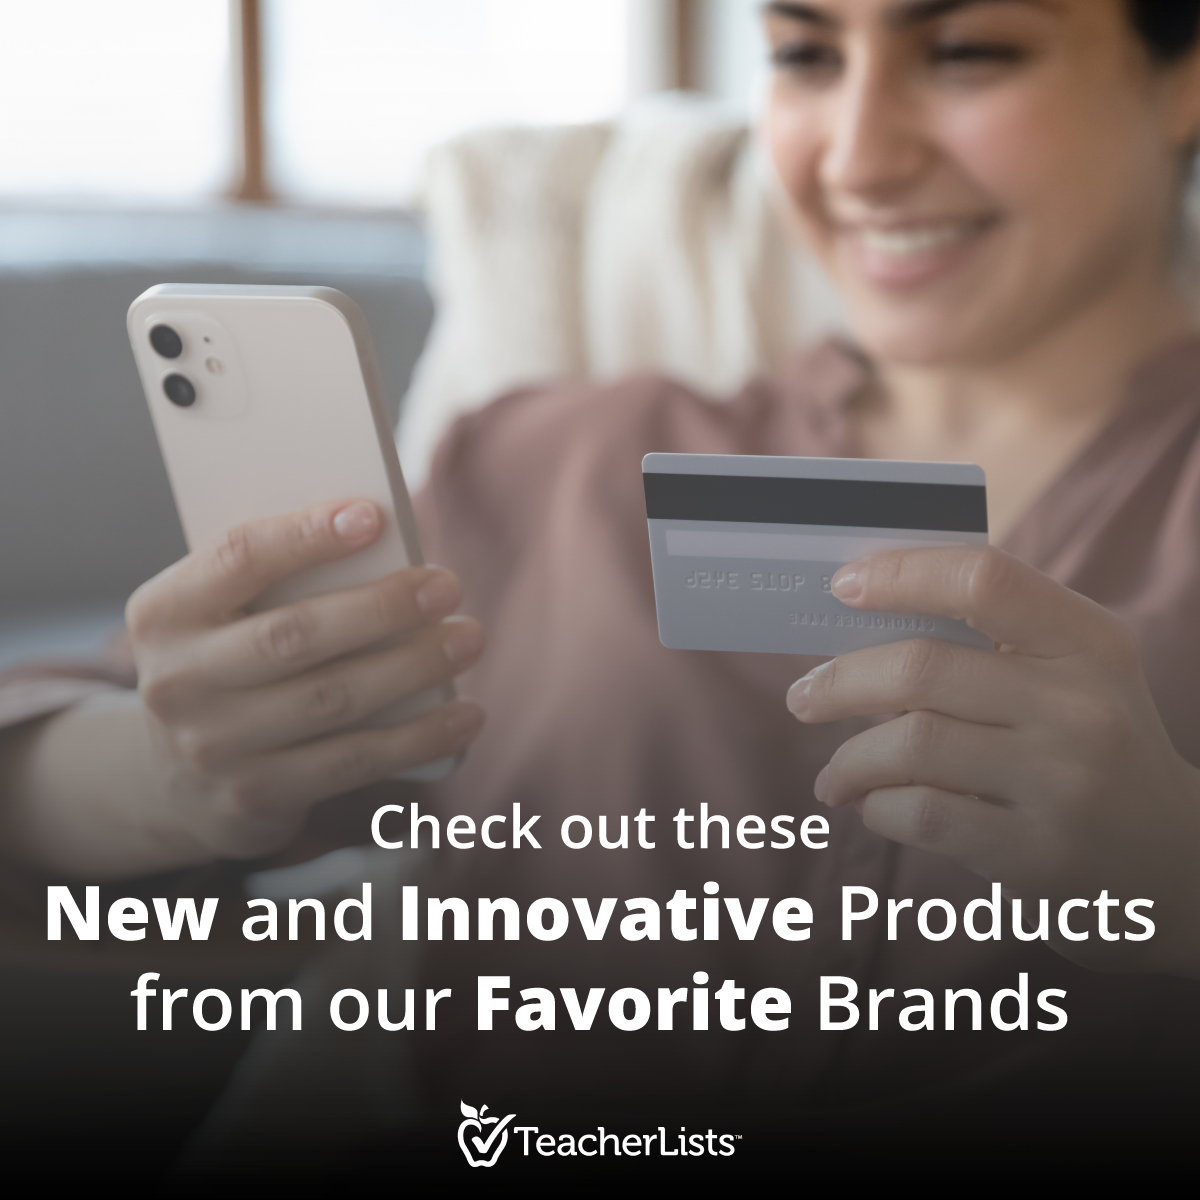 New and Innovative Products for Teachers